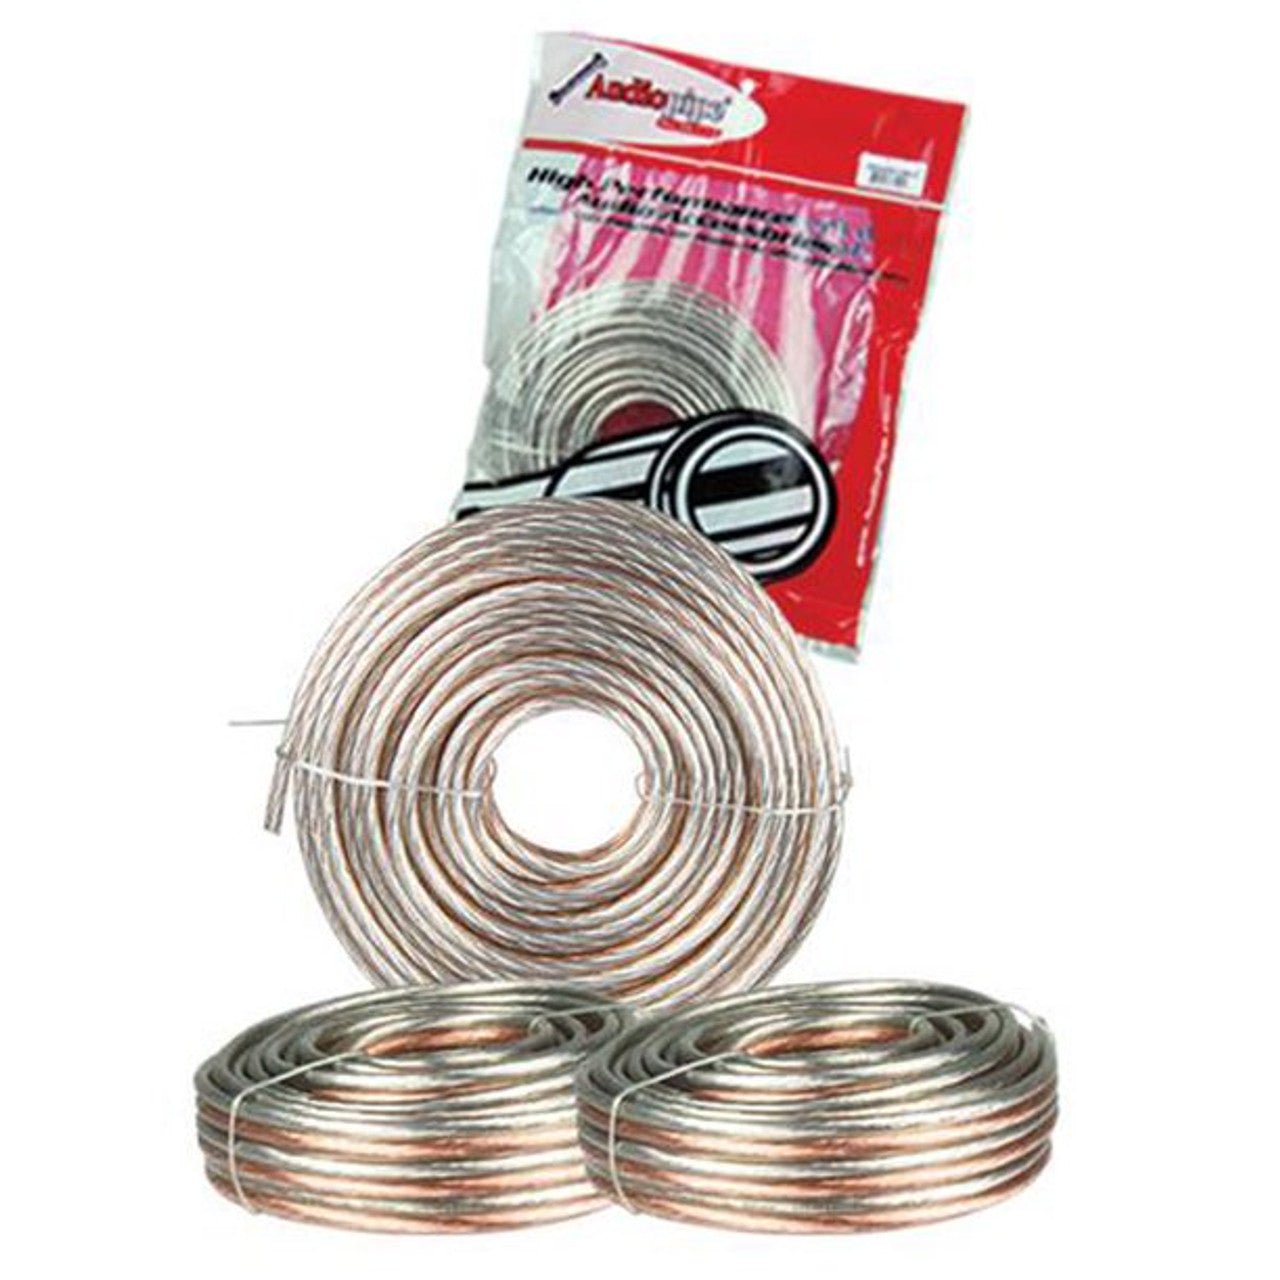 Cable Bocina Roll Audiopipe